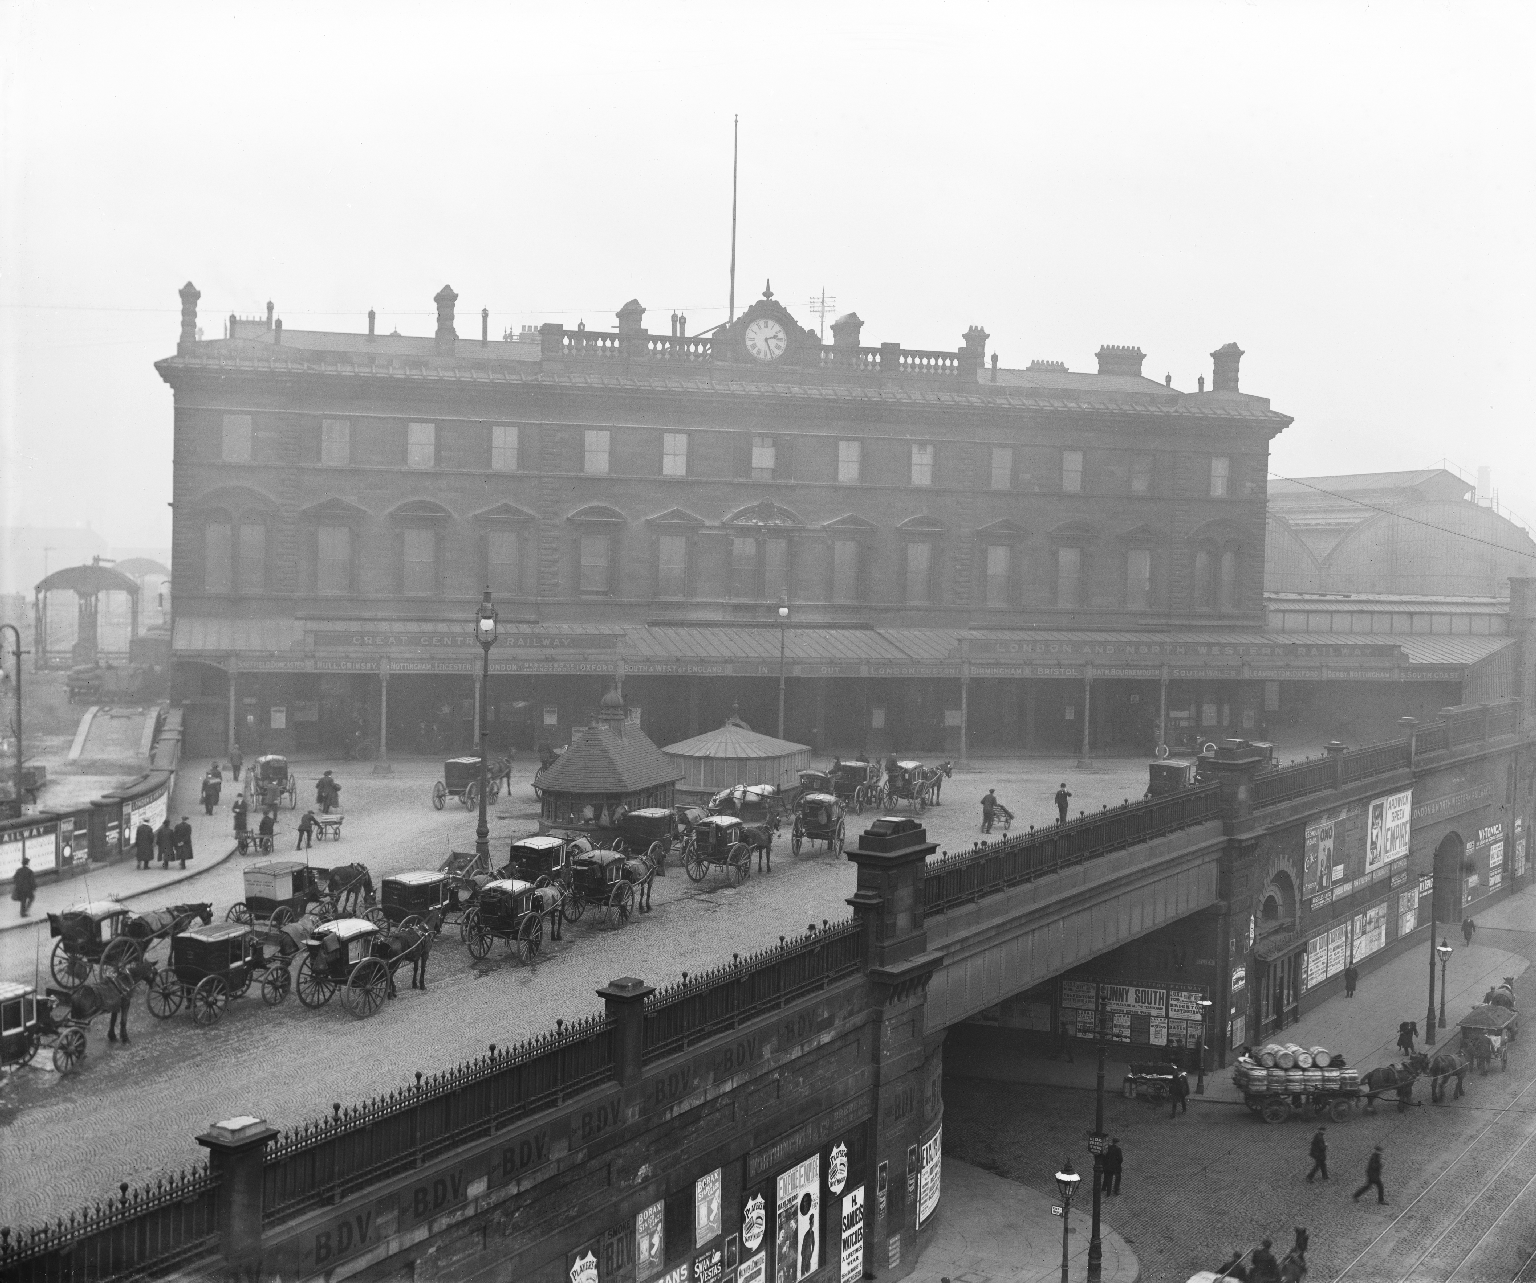 Manchester London Road station and forecourt, 1913. 